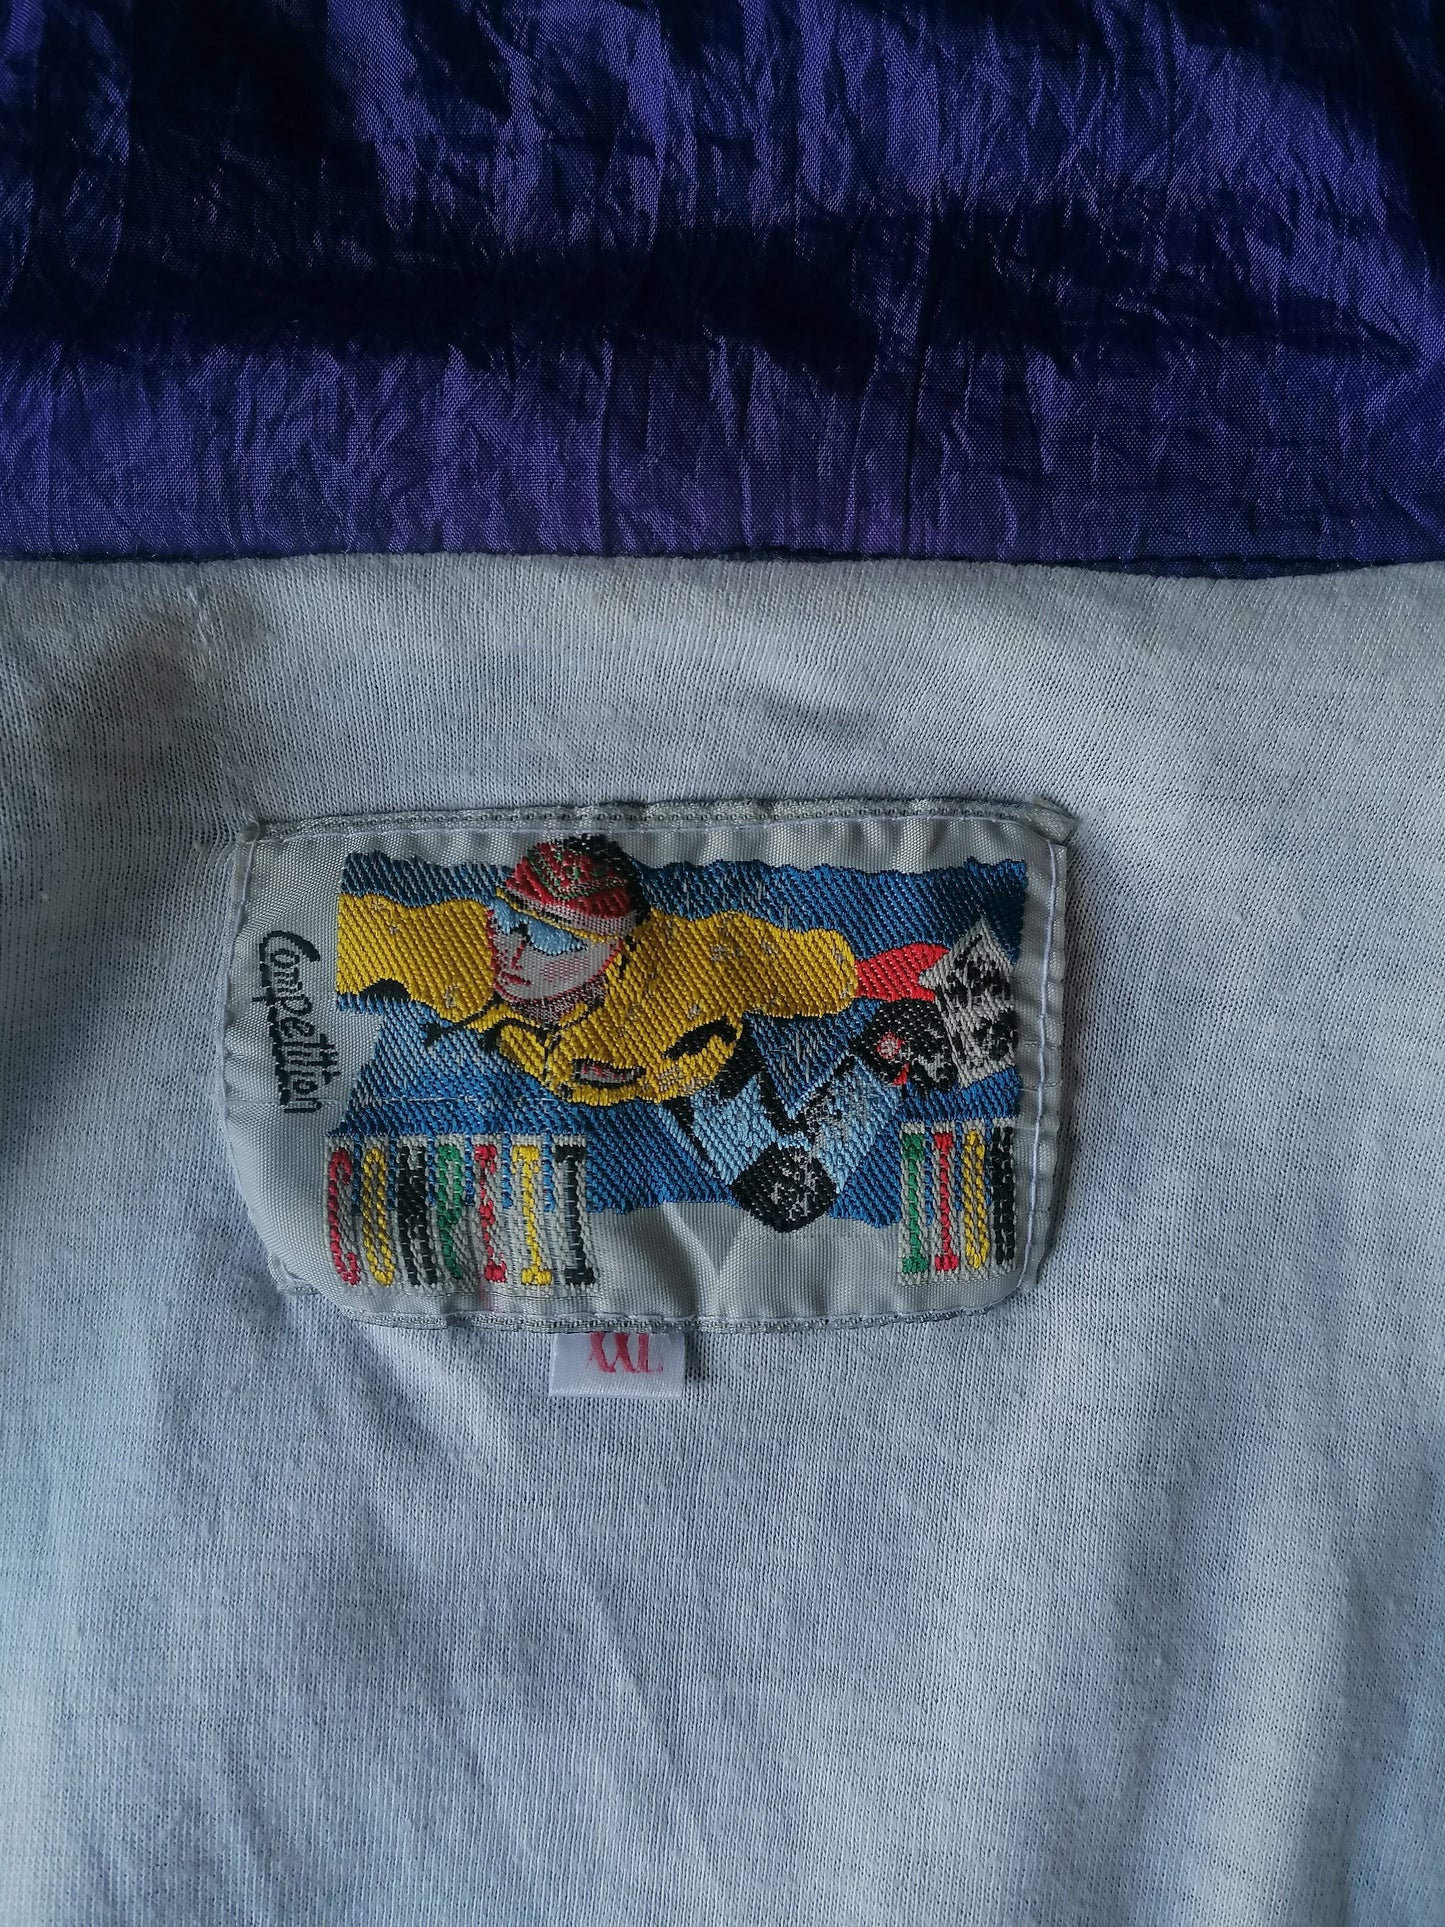 Vintage retro competition windbreaker. Lightly lined. Blue purple colored. Size XXL / 2XL